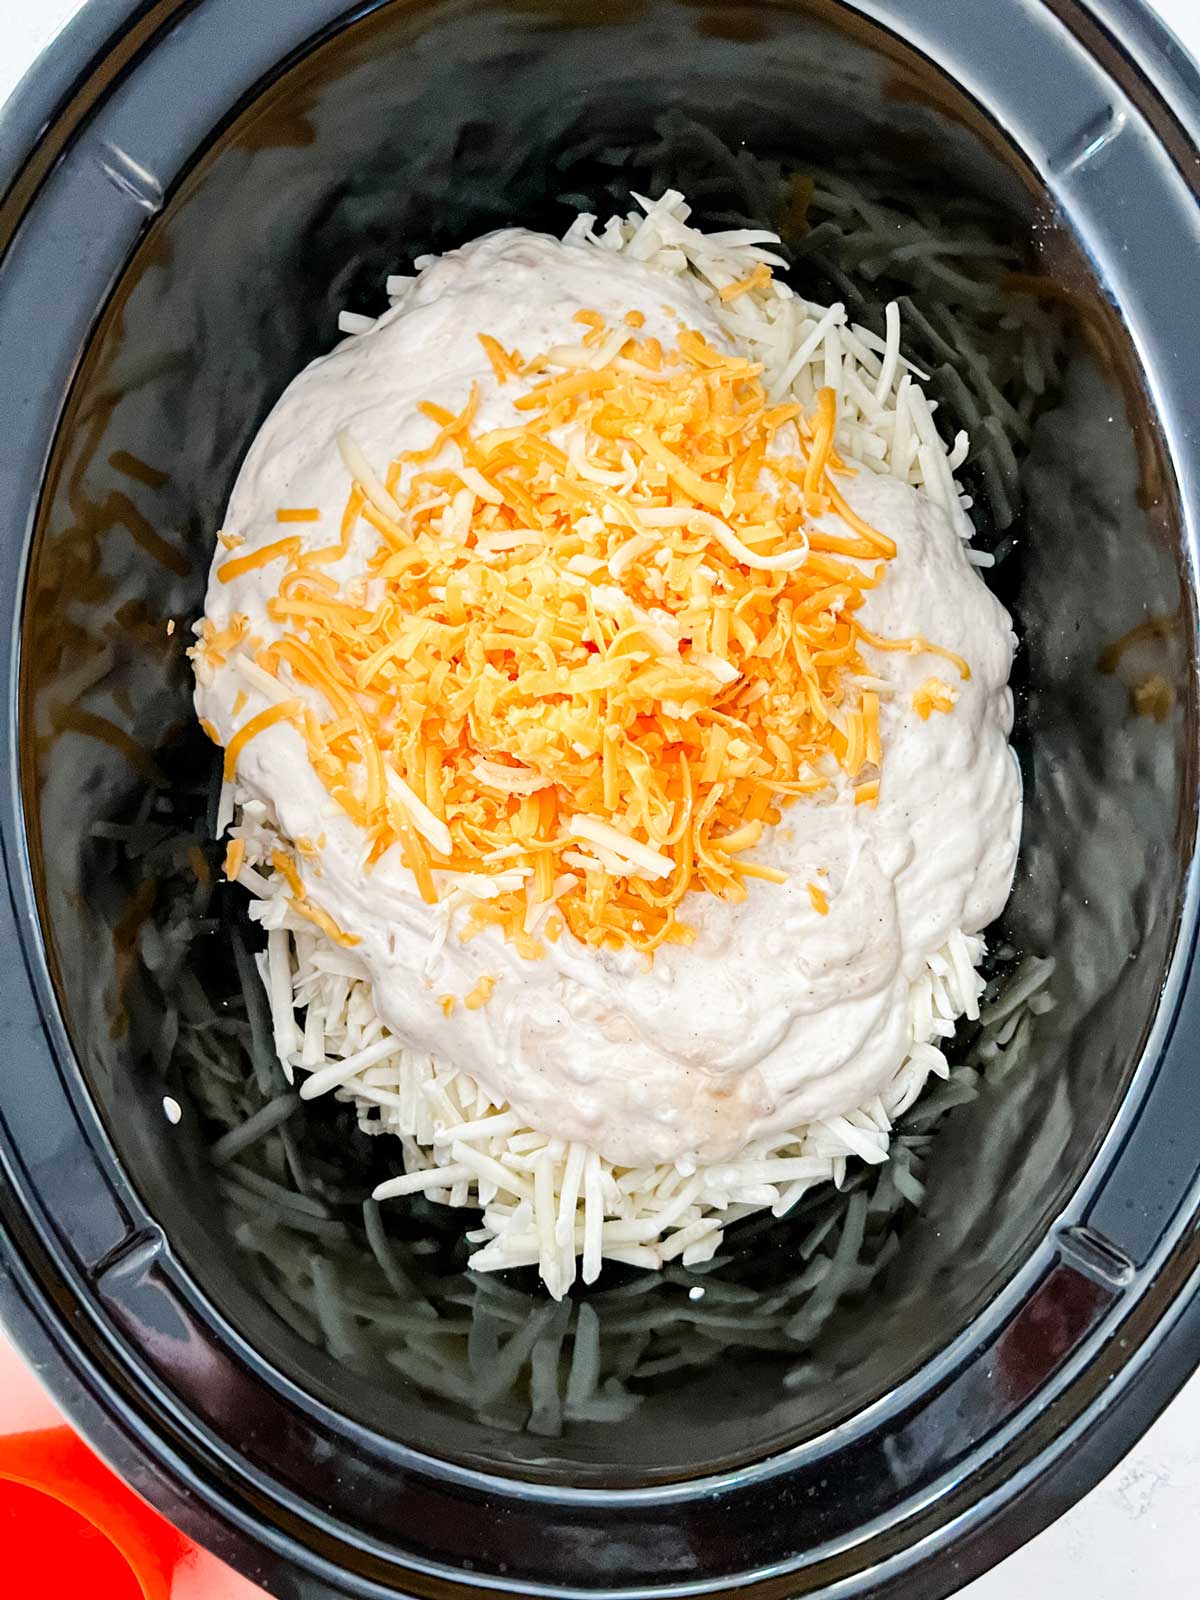 Photo of cheese and a homemade creamy sauce being added to hash browns in a crockpot.